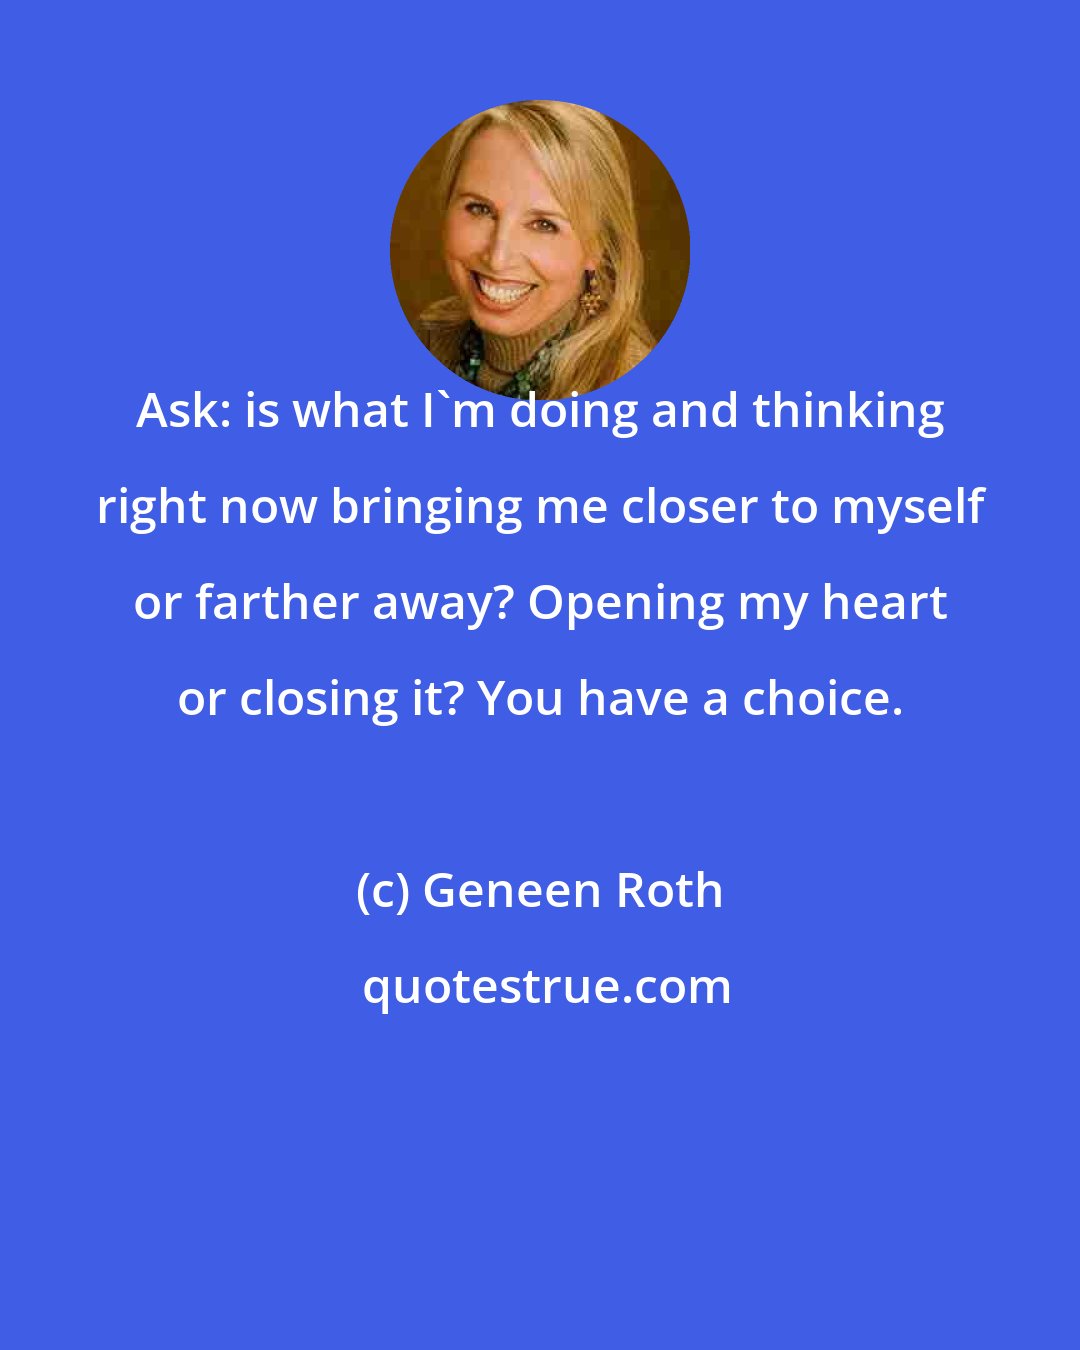 Geneen Roth: Ask: is what I'm doing and thinking right now bringing me closer to myself or farther away? Opening my heart or closing it? You have a choice.